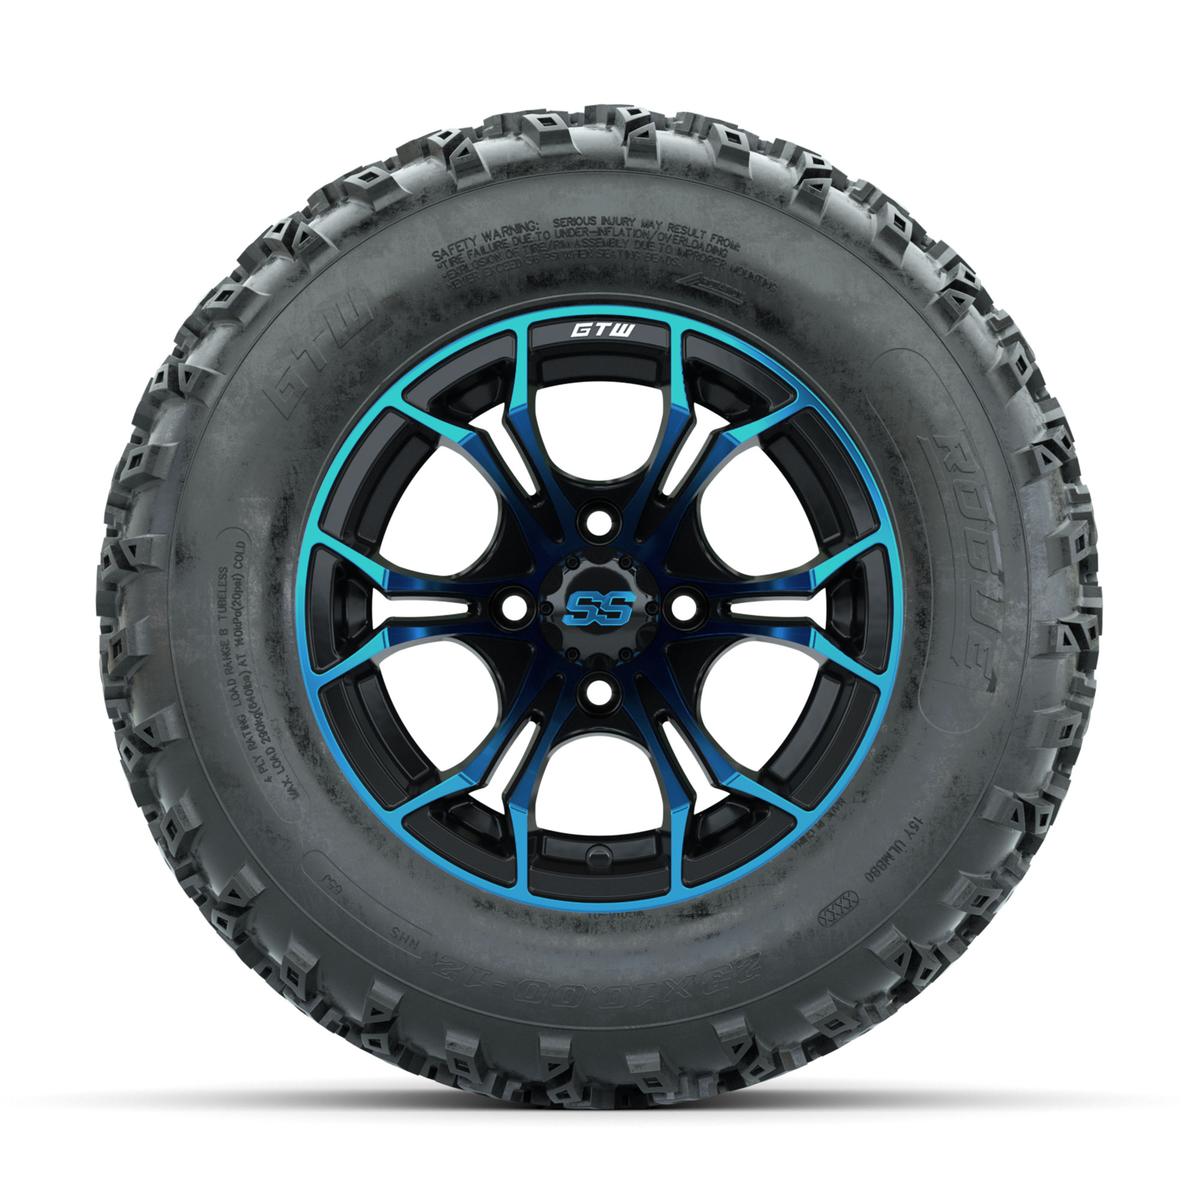 GTW Spyder Blue/Black 12 in Wheels with 23x10.00-12 Rogue All Terrain Tires – Full Set